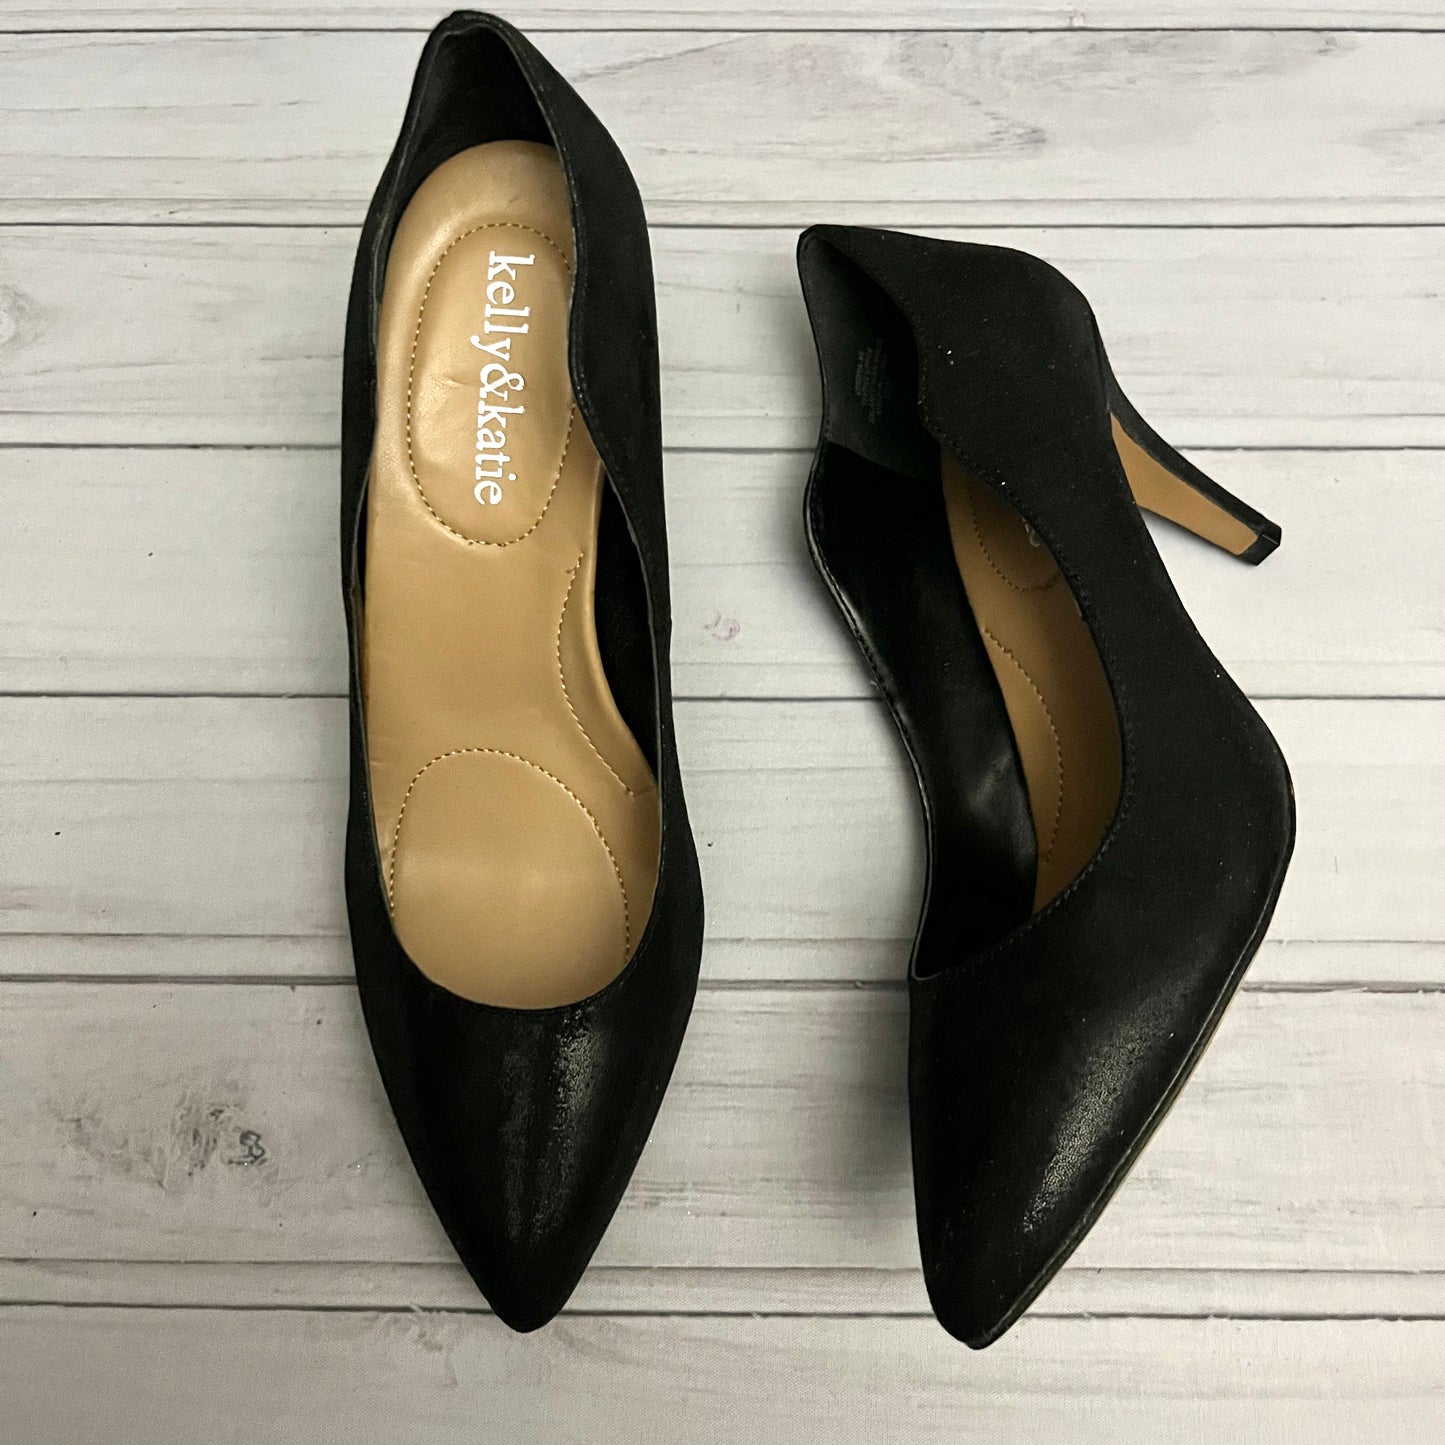 Shoes Heels Stiletto By Kelly And Katie  Size: 8.5